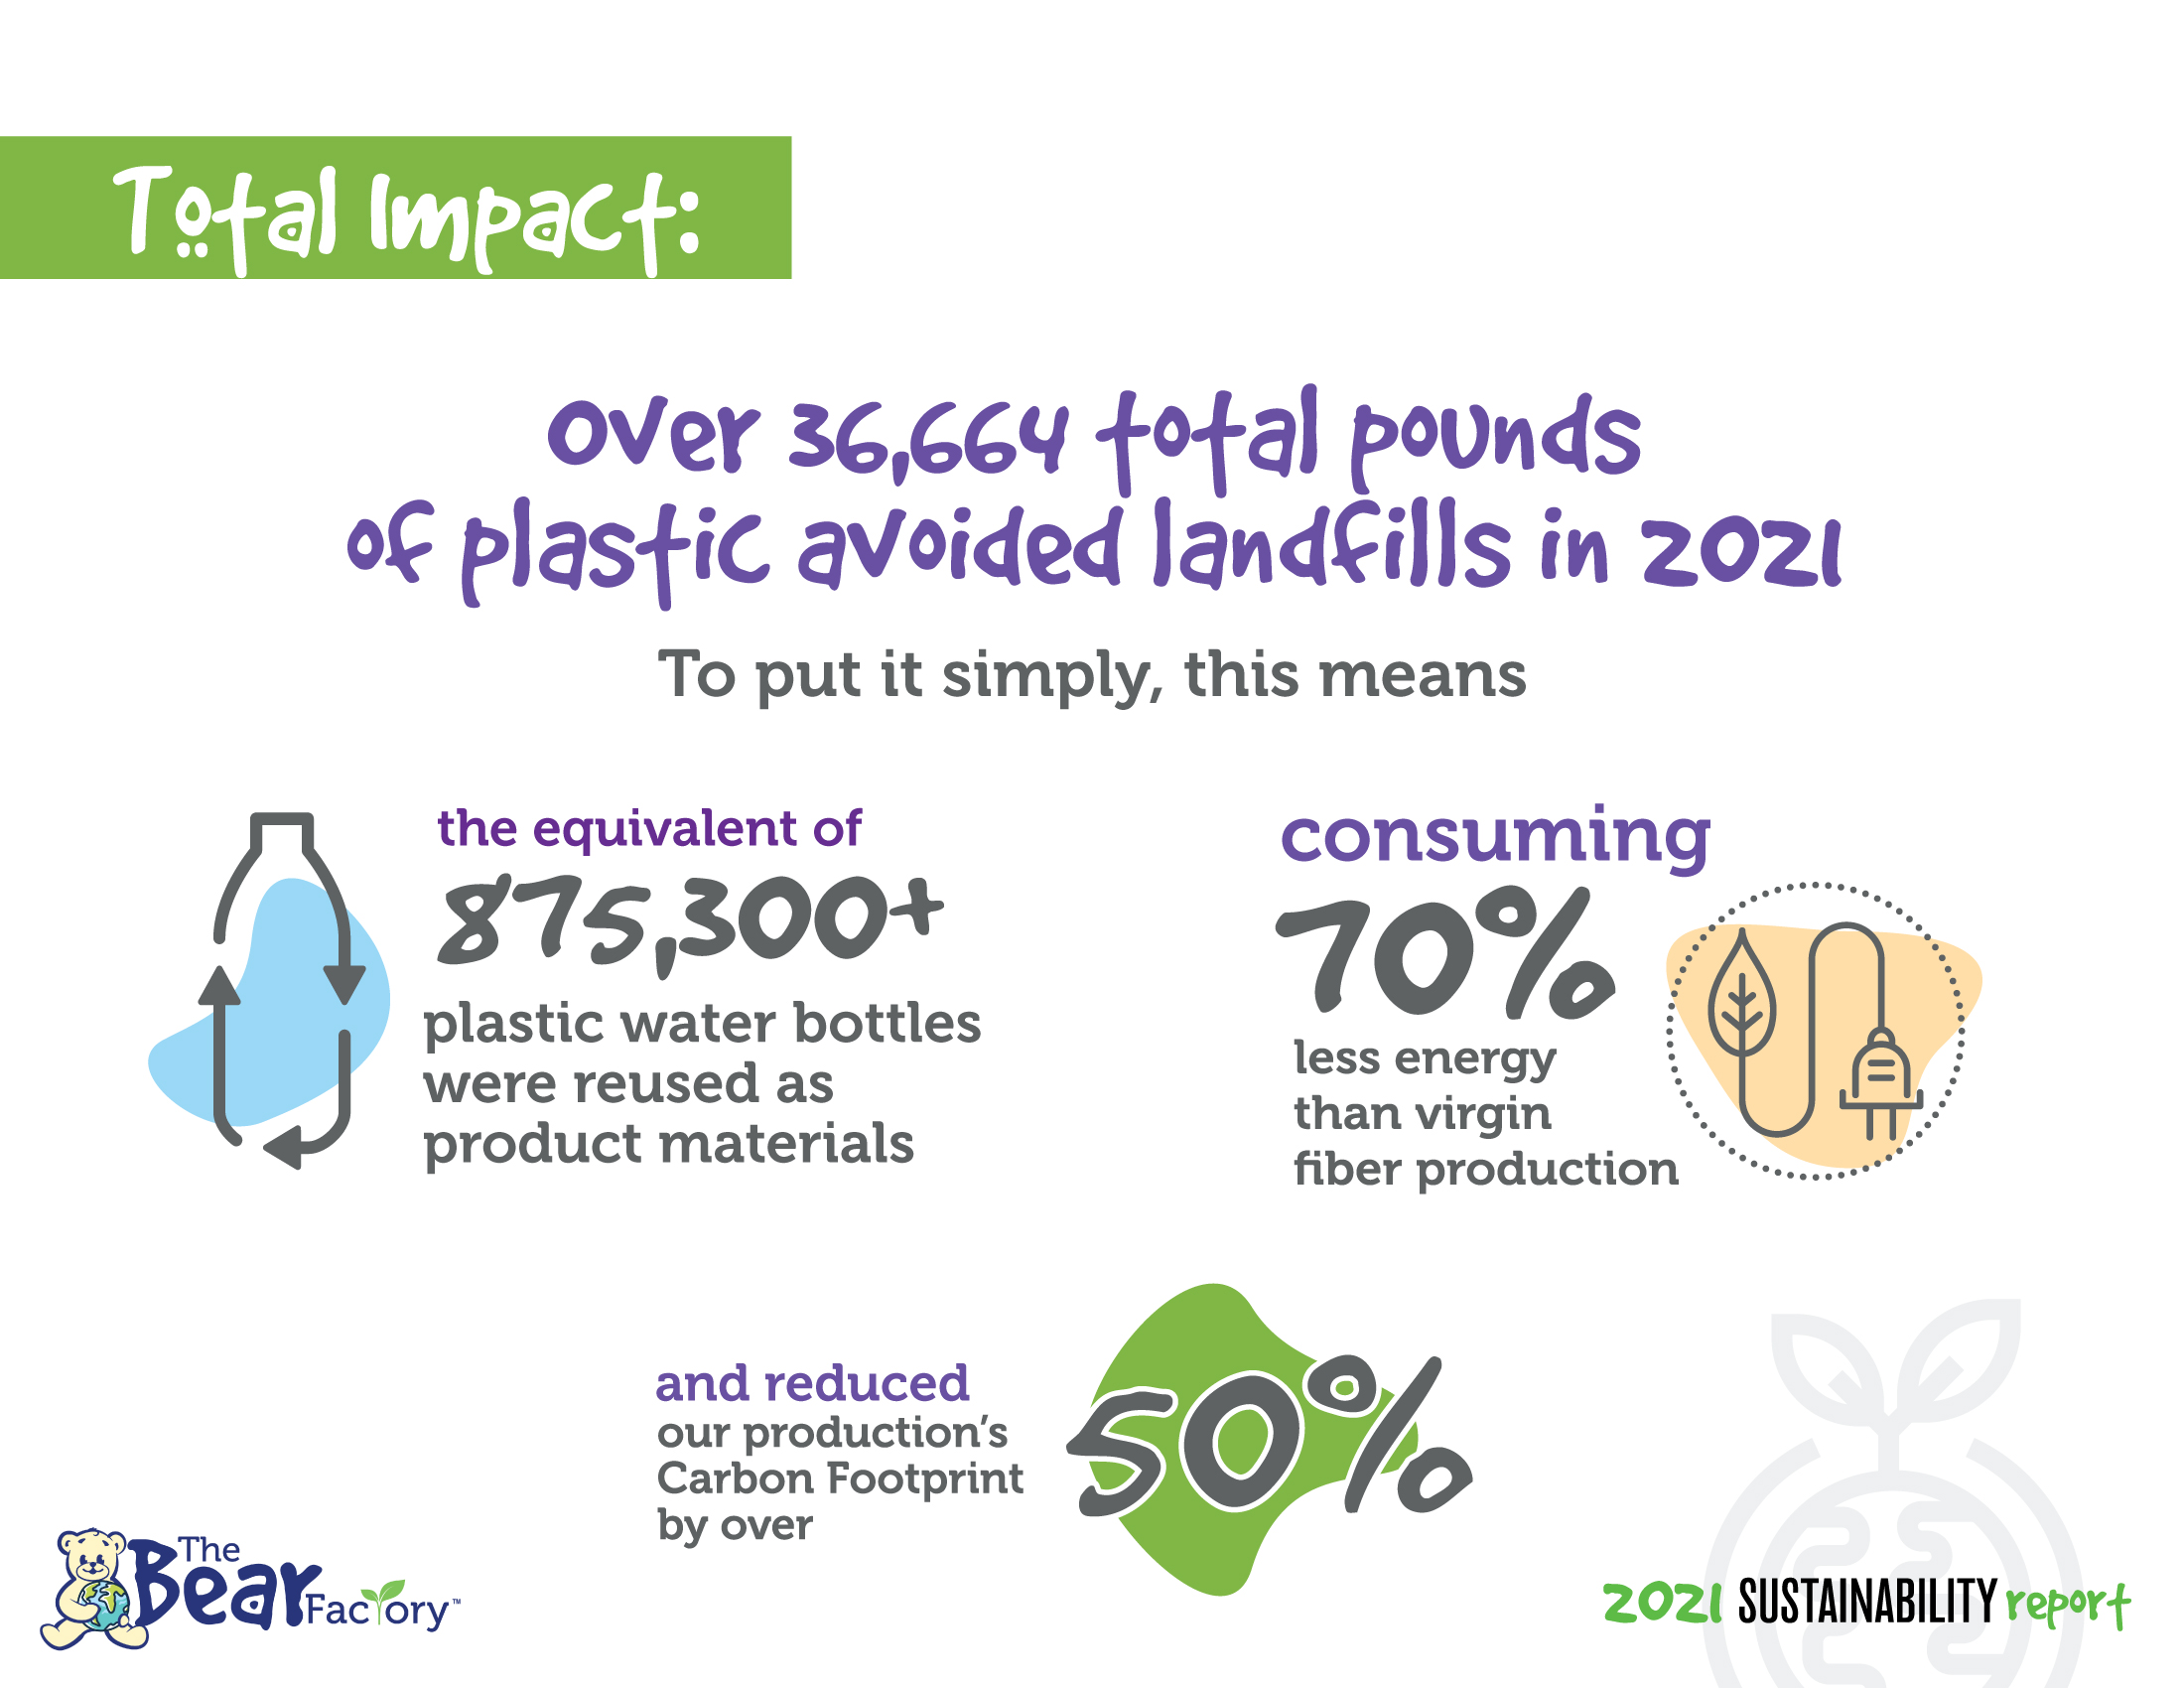 over 36,664 total pounds of plastic avoided landfills in 2021 To put it simply, this means the equivalent of 875,300+ plastic water bottles were reused as product materials The Bear Factory and reduced our production's Carbon Footprint by over consuming 70% less energy than virgin fiber production and reduced our production's carbon footprint by 50%